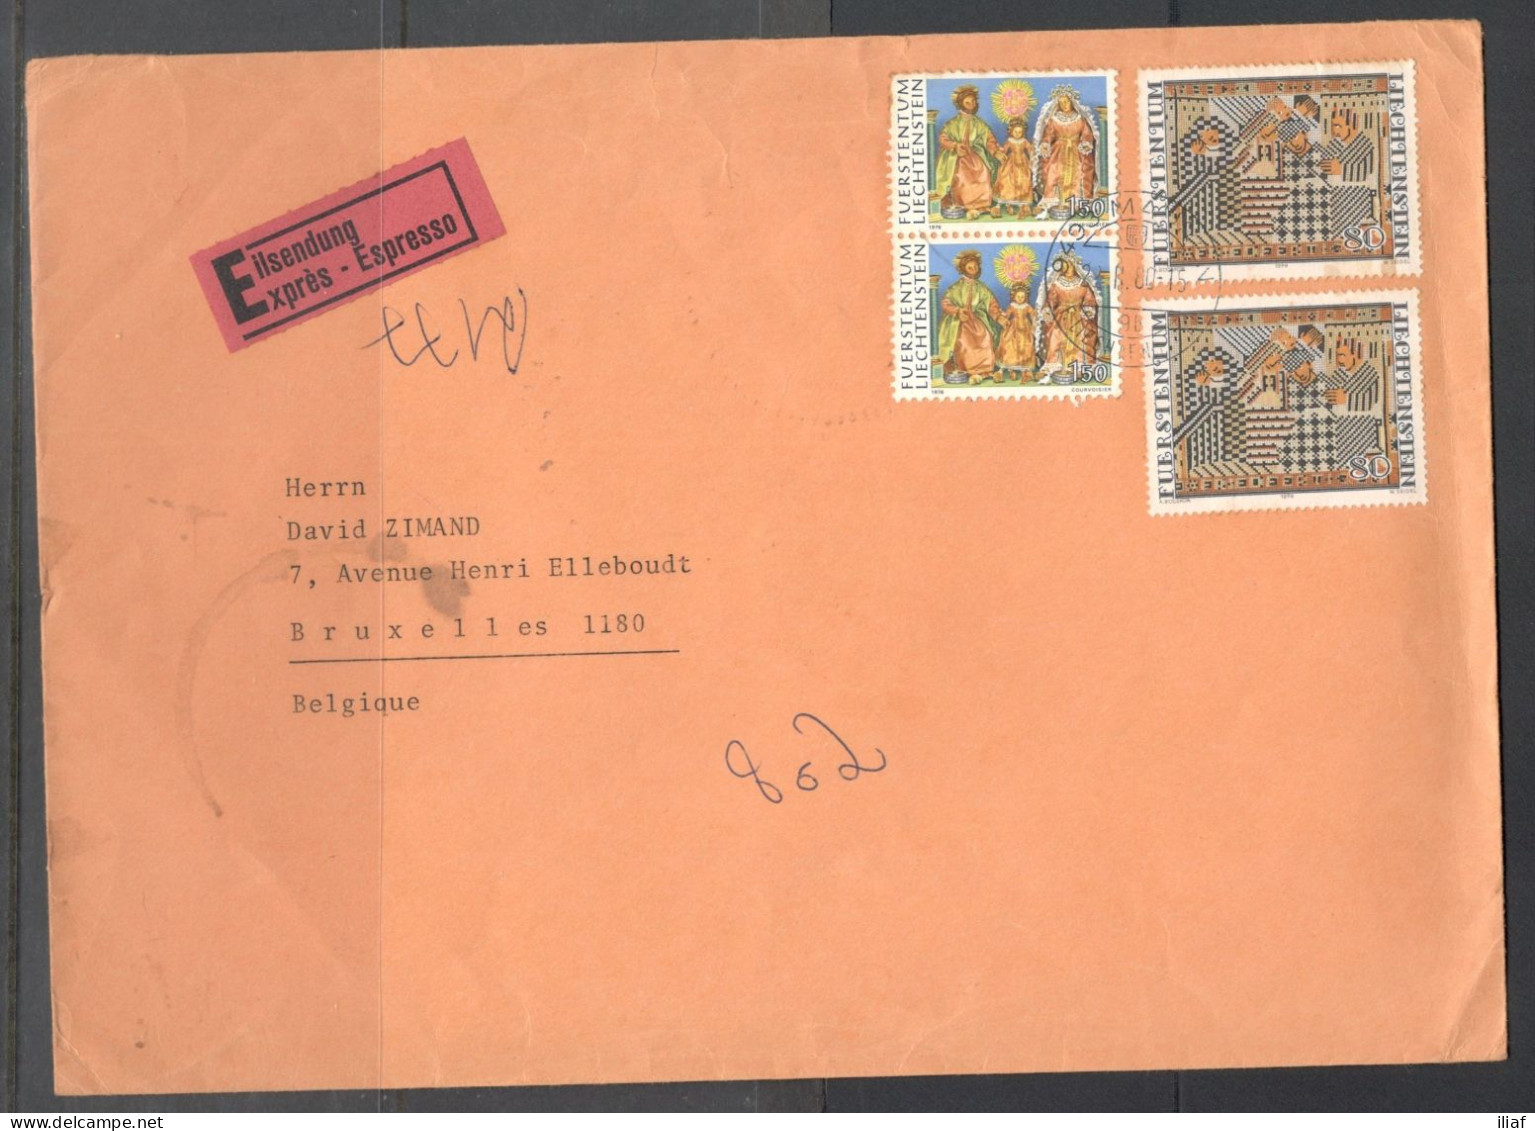 Liechtenstein. Stamp Sc. 613 And 677 On Express Letter, Sent From Mauren On 22.11.1980 To Belgium. - Covers & Documents